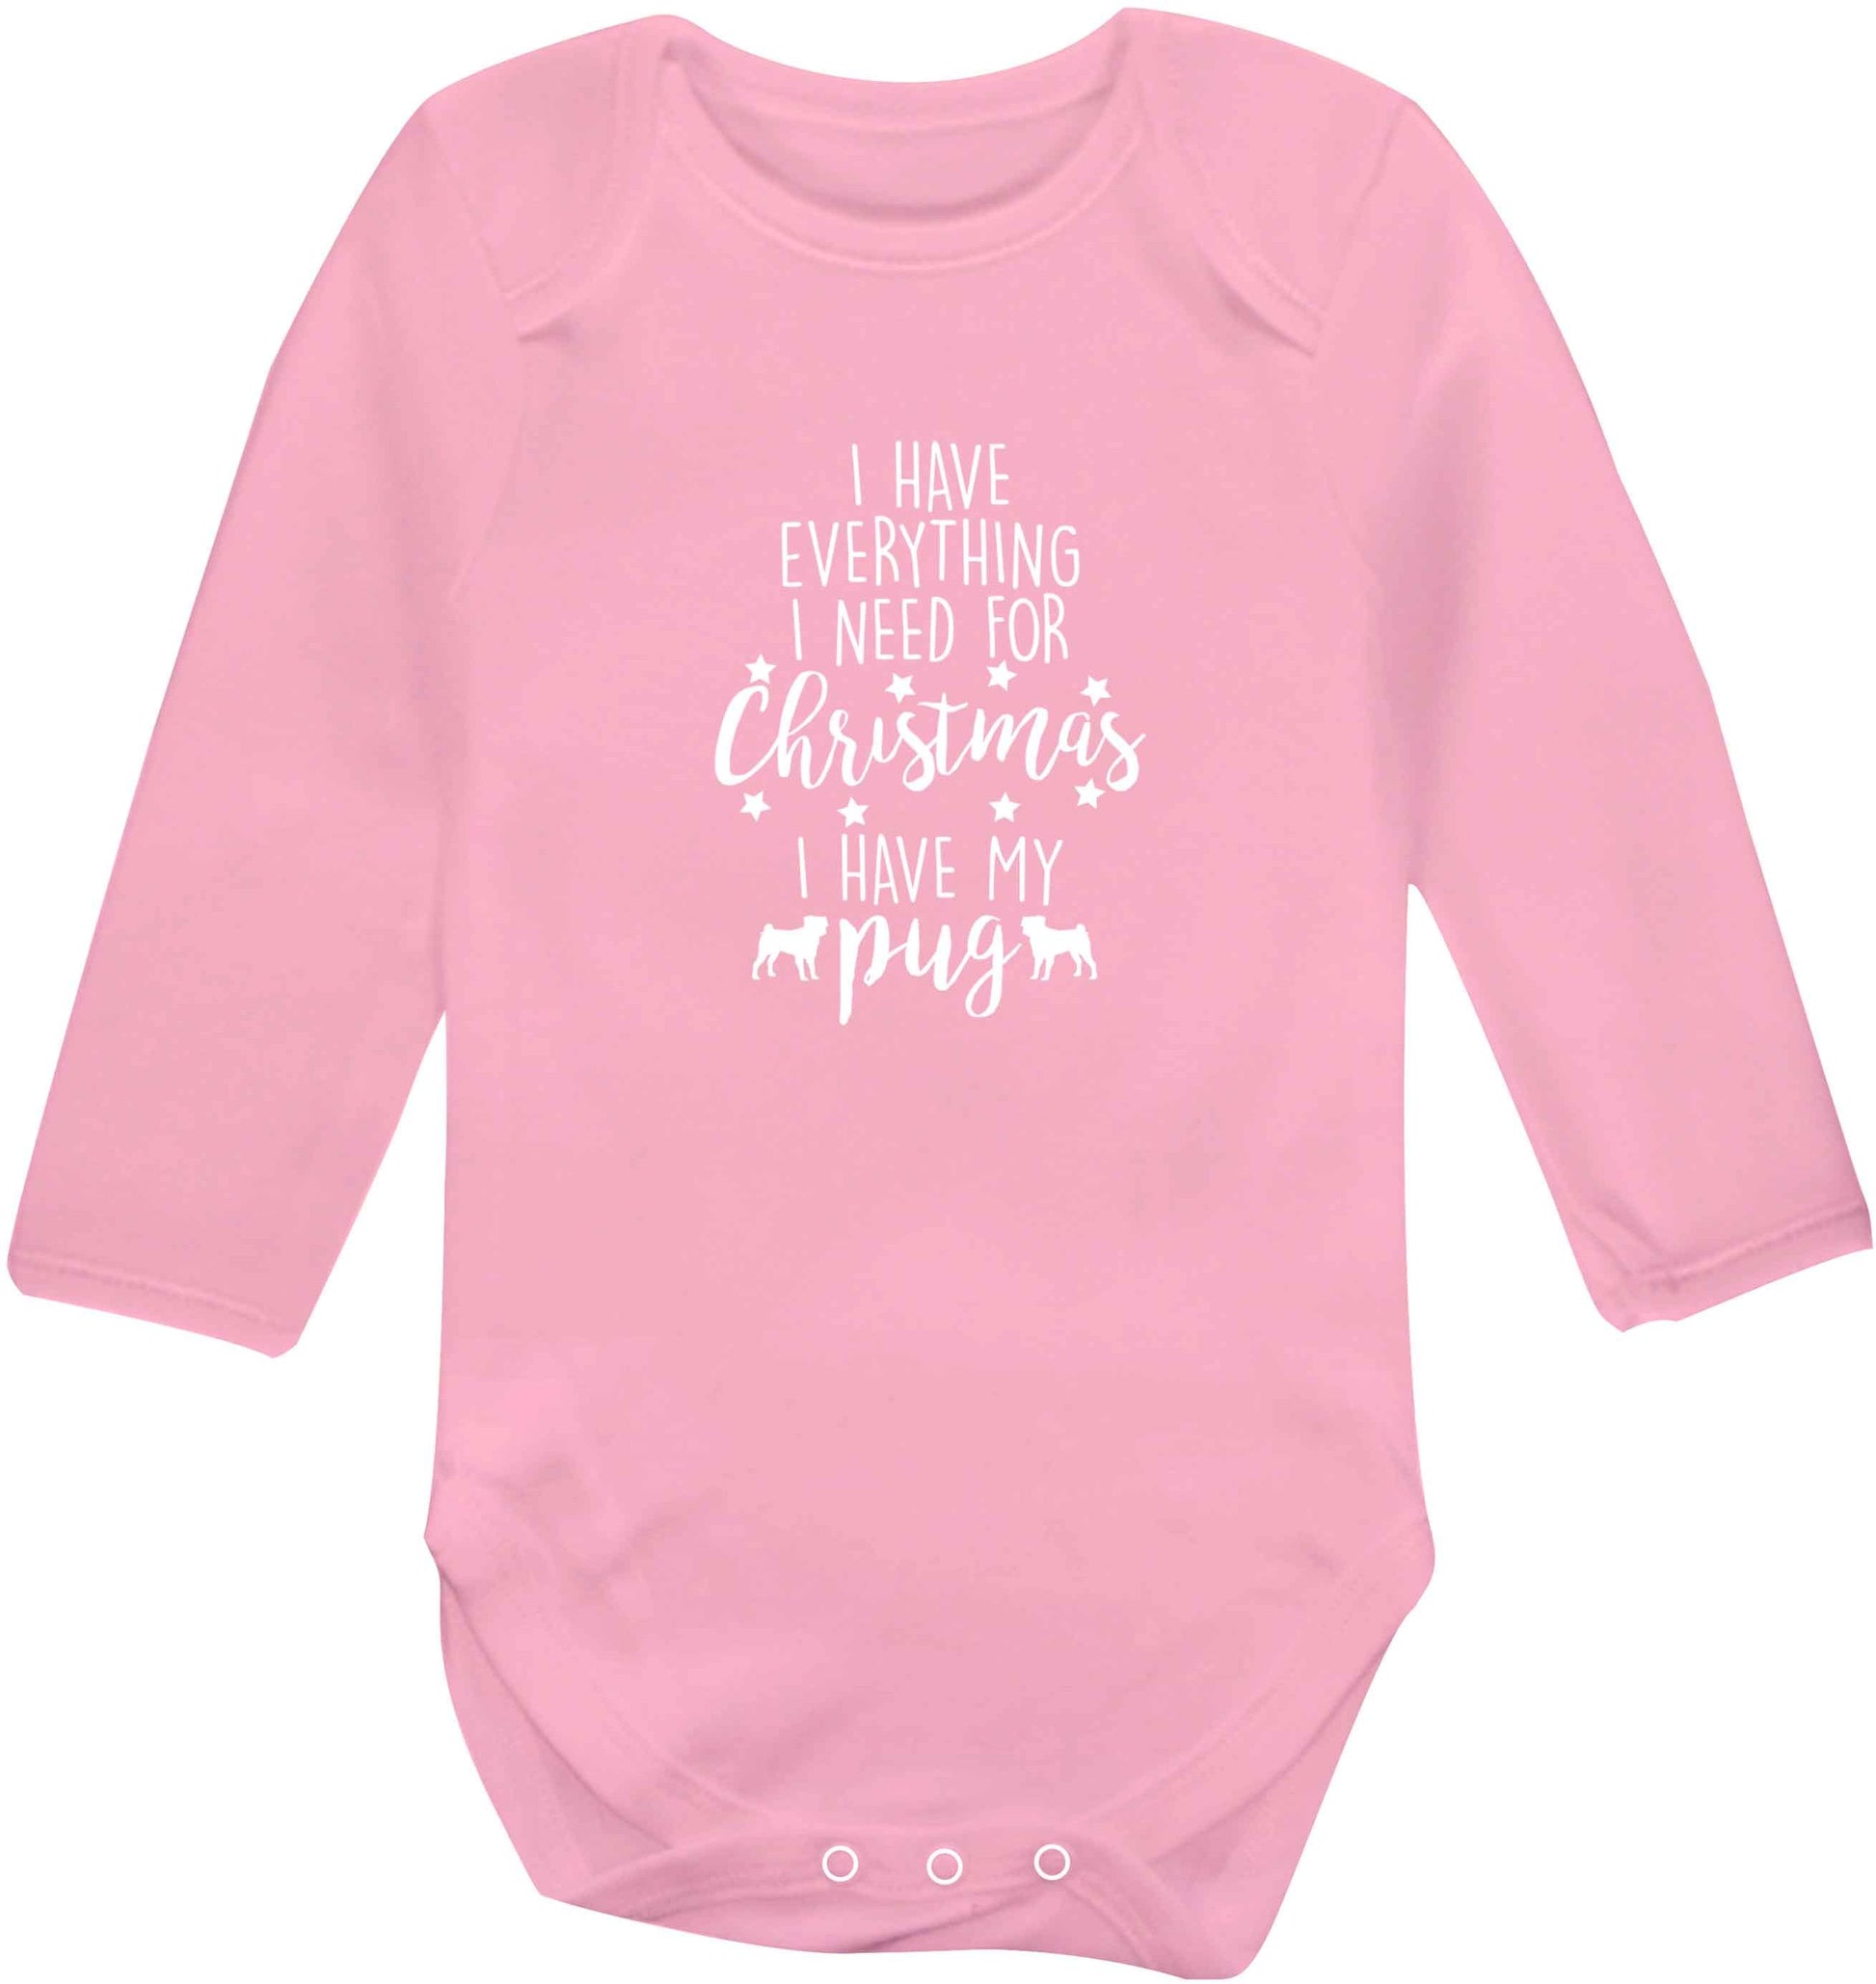 I have everything I need for Christmas I have my pug baby vest long sleeved pale pink 6-12 months